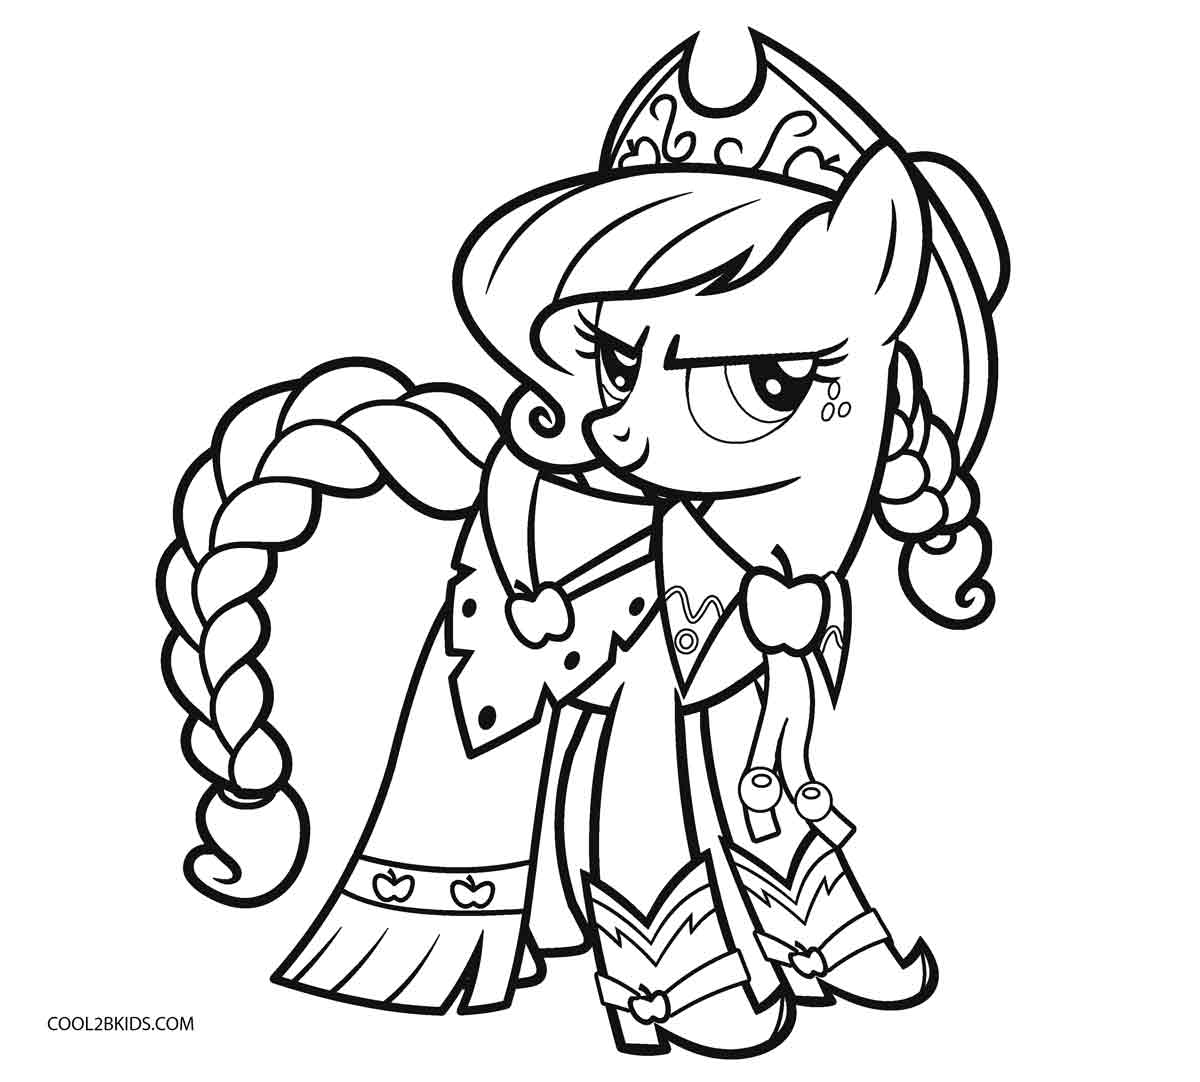 my little pony characters coloring pages at getcolorings